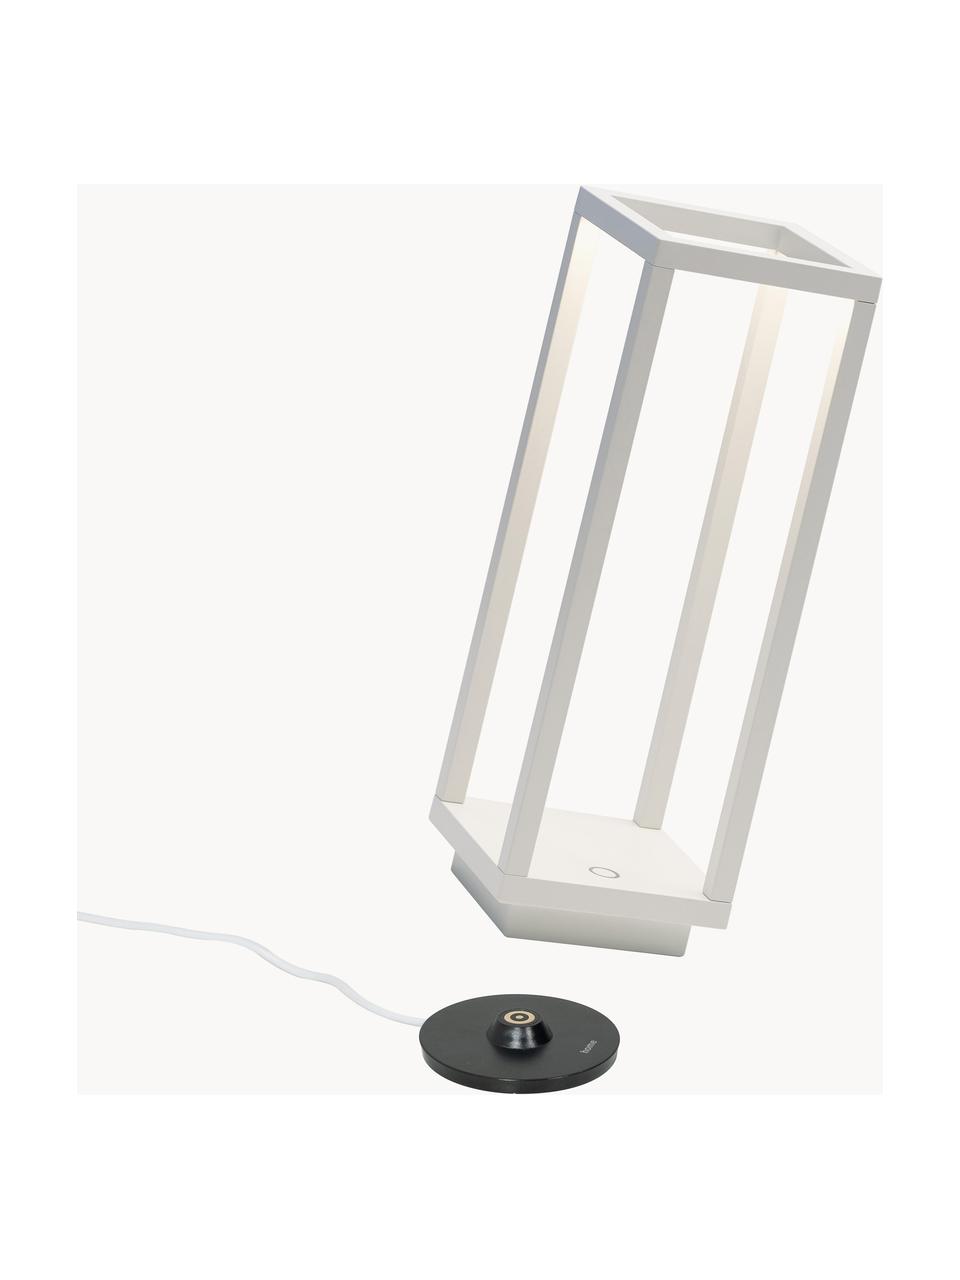 Mobile dimmbare LED-Tischlampe Home Pro, Weiß, B 10 x H 29 cm